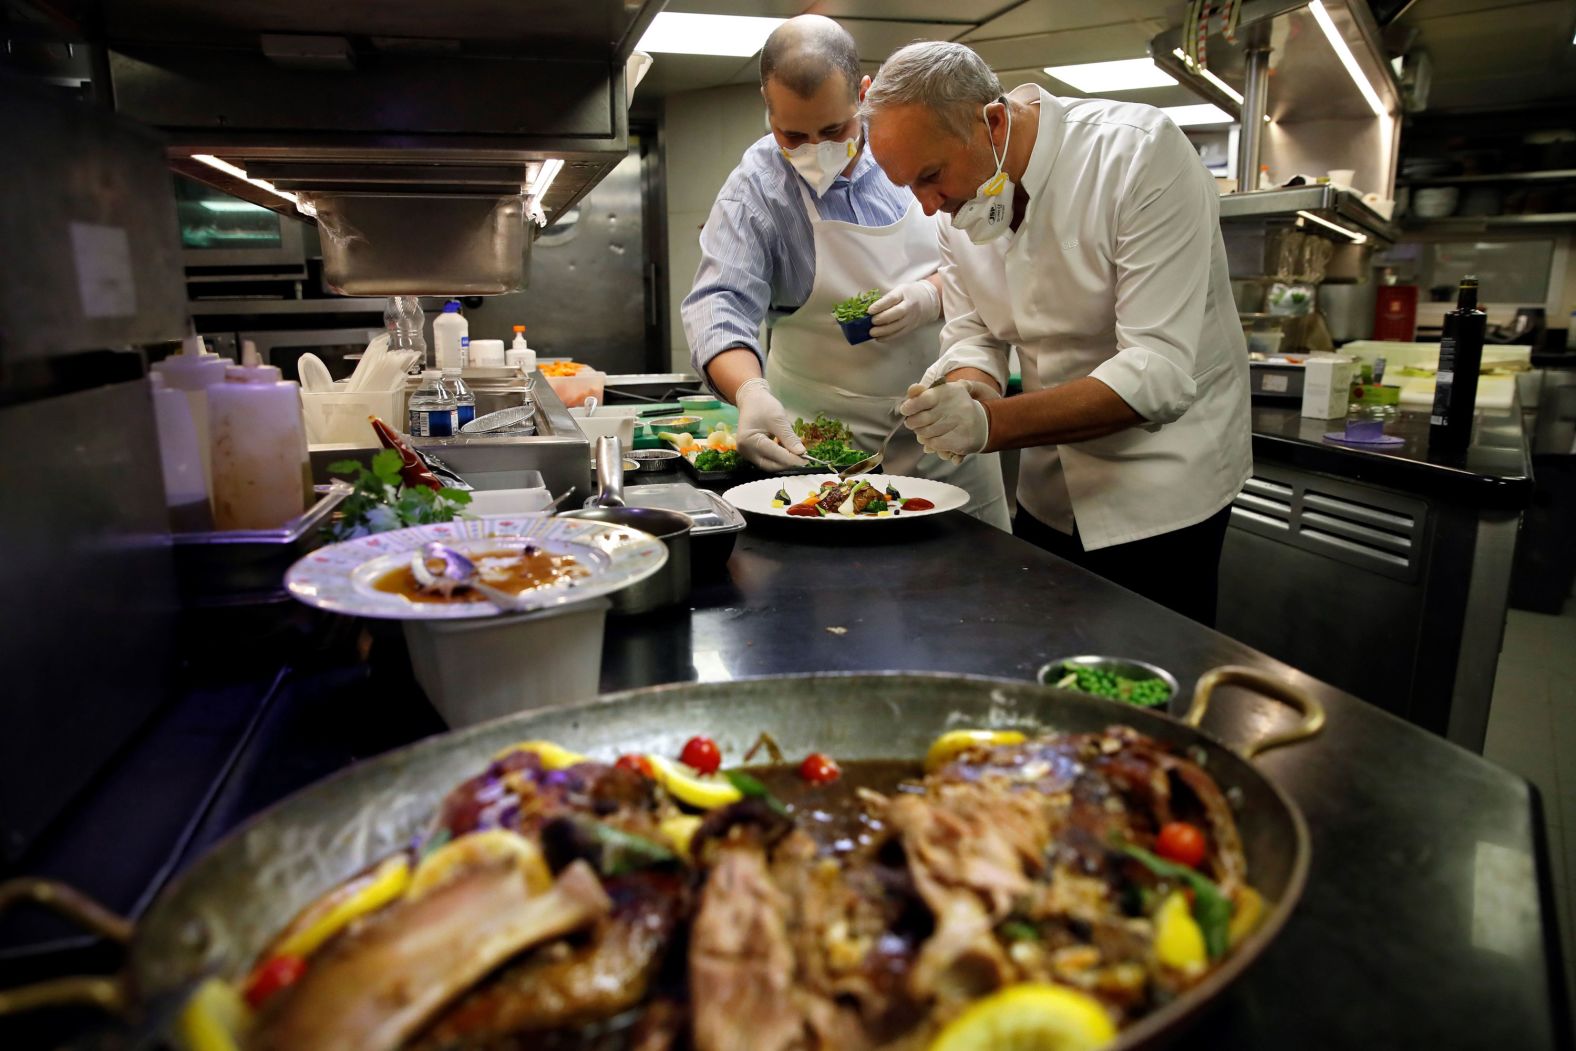 Michelin-starred chefs Alan Taudon, left, and Christian Le Squer cook for employees of a Parisian hospital on April 11.